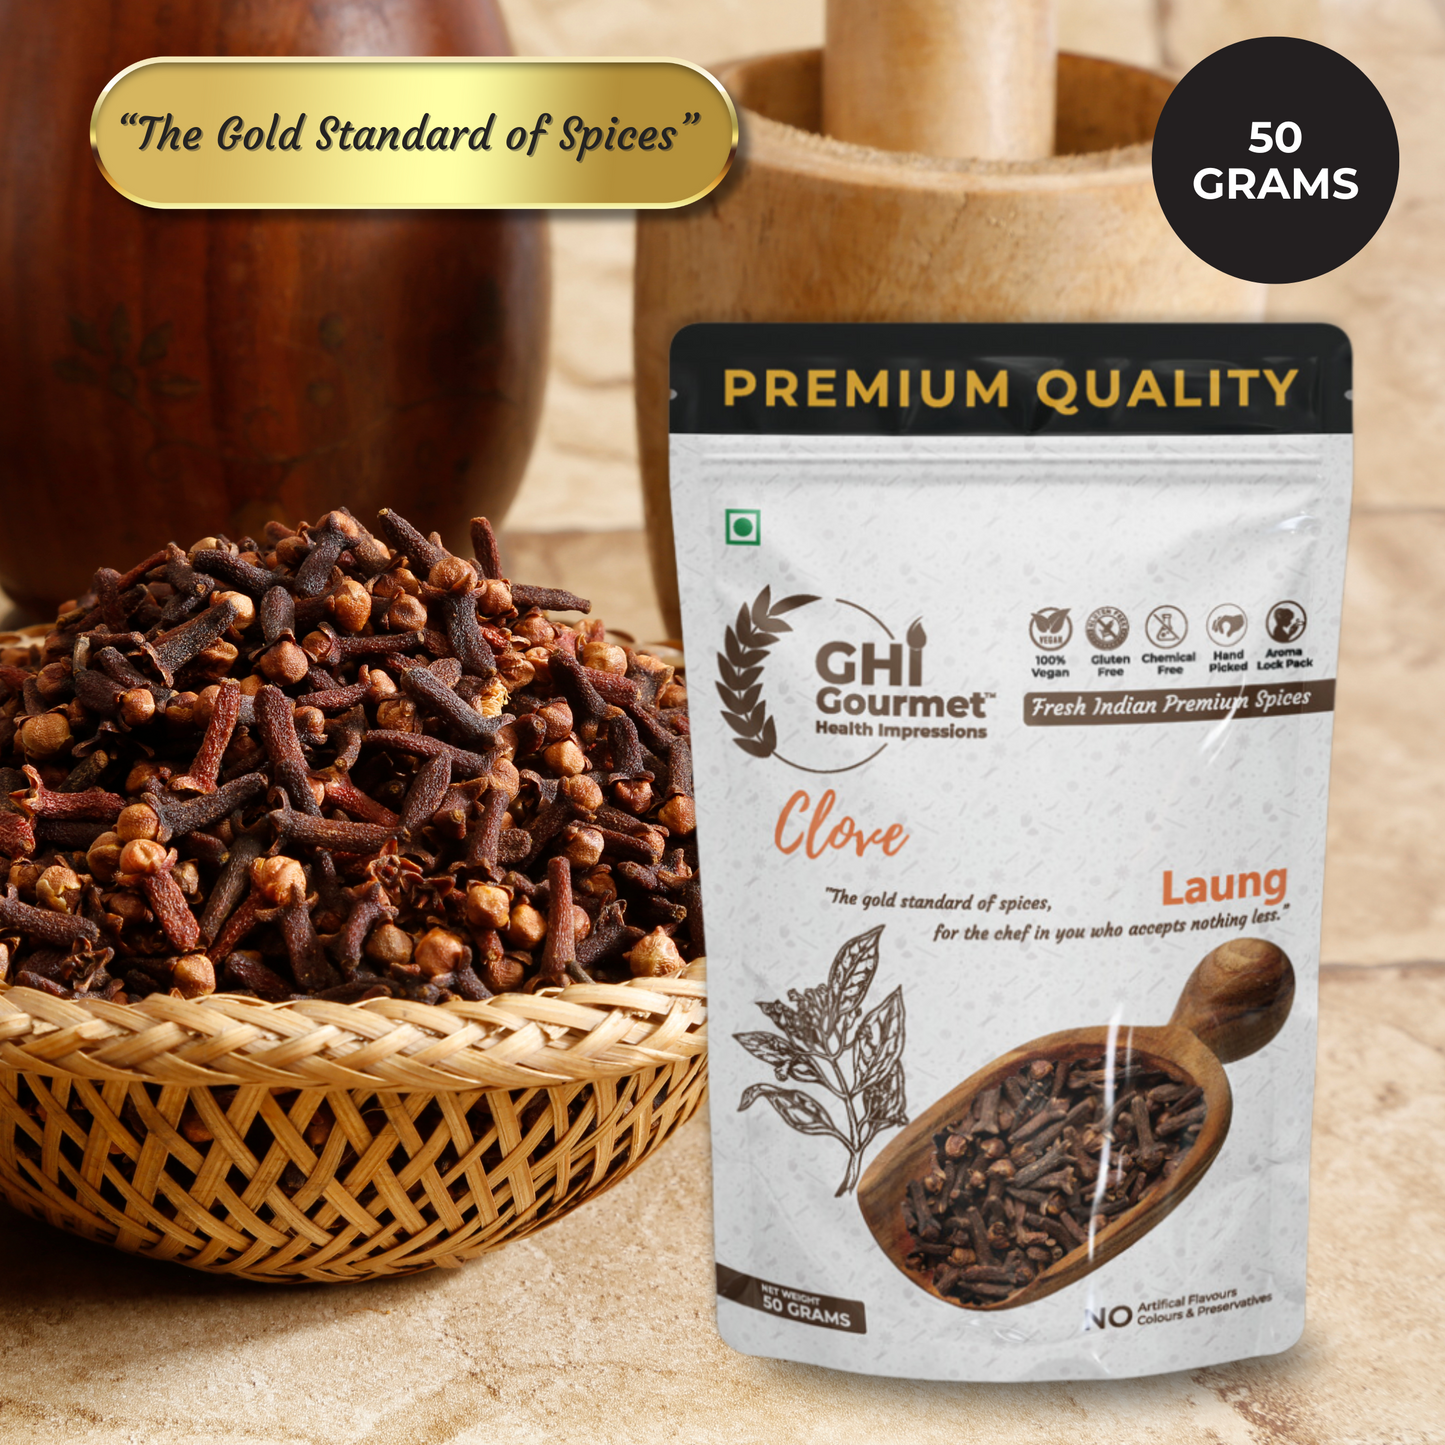 GHI Spice Combo | Pack Of 2 | Black Pepper Powder 50g + 25g = 75g | Whole Clove 50g